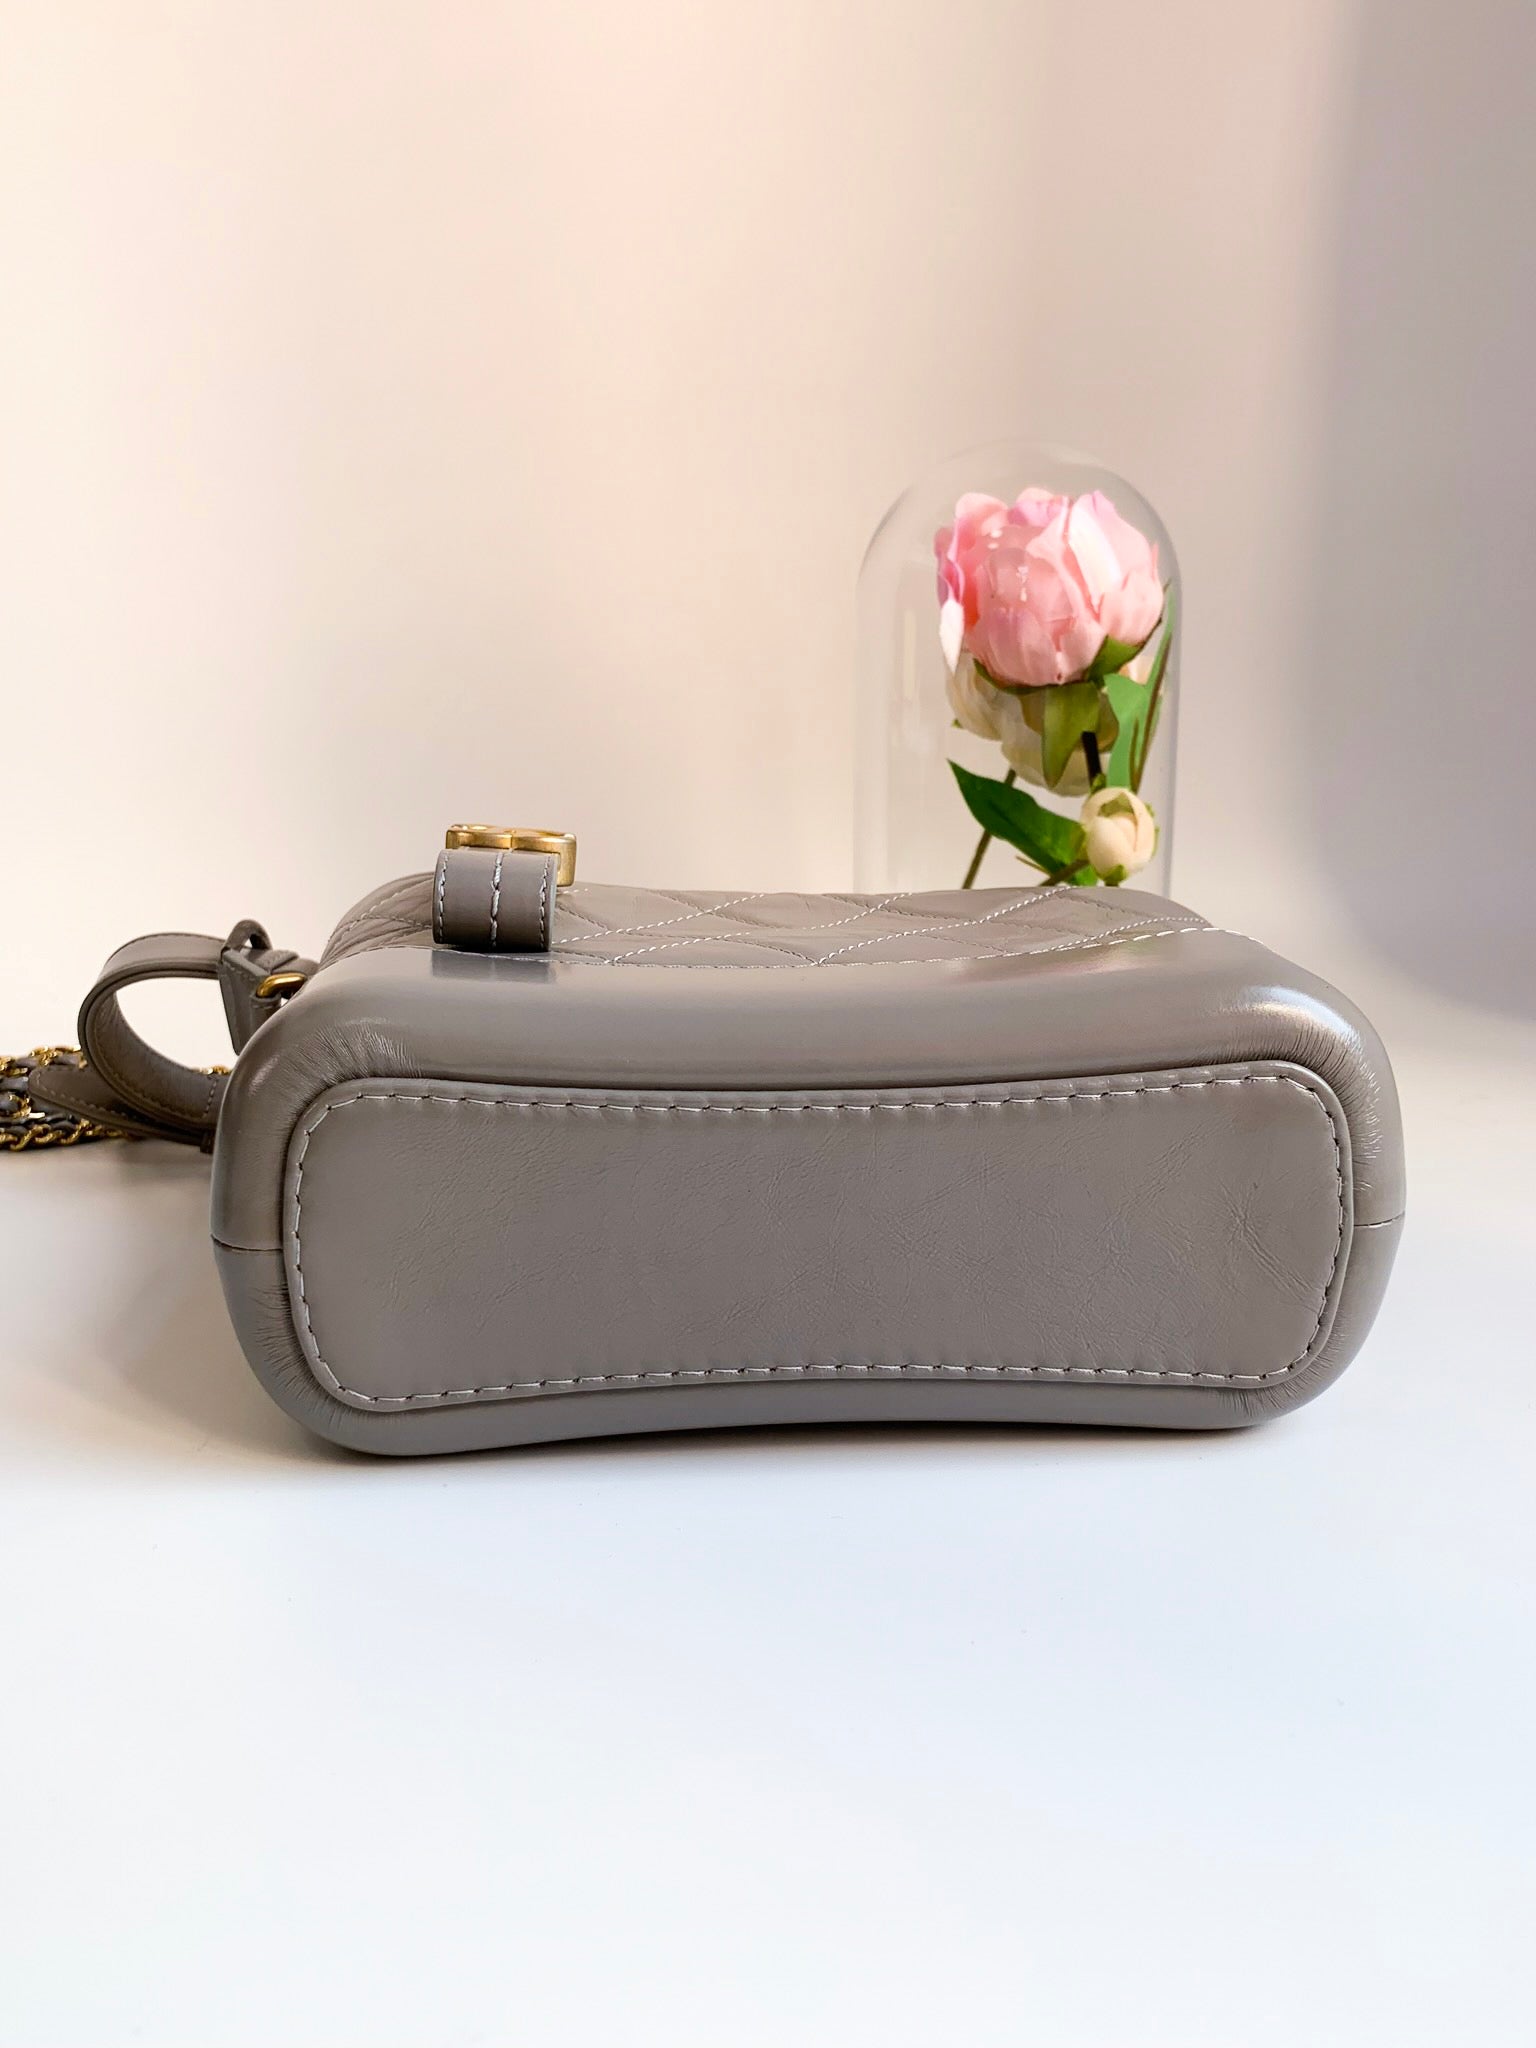 Chanel 19B Grey Taupe Small Gabrielle ⁣⁣⁣⁣⁣⁣⁣⁣⁣⁣⁣⁣⁣⁣⁣ – Coco Approved Studio